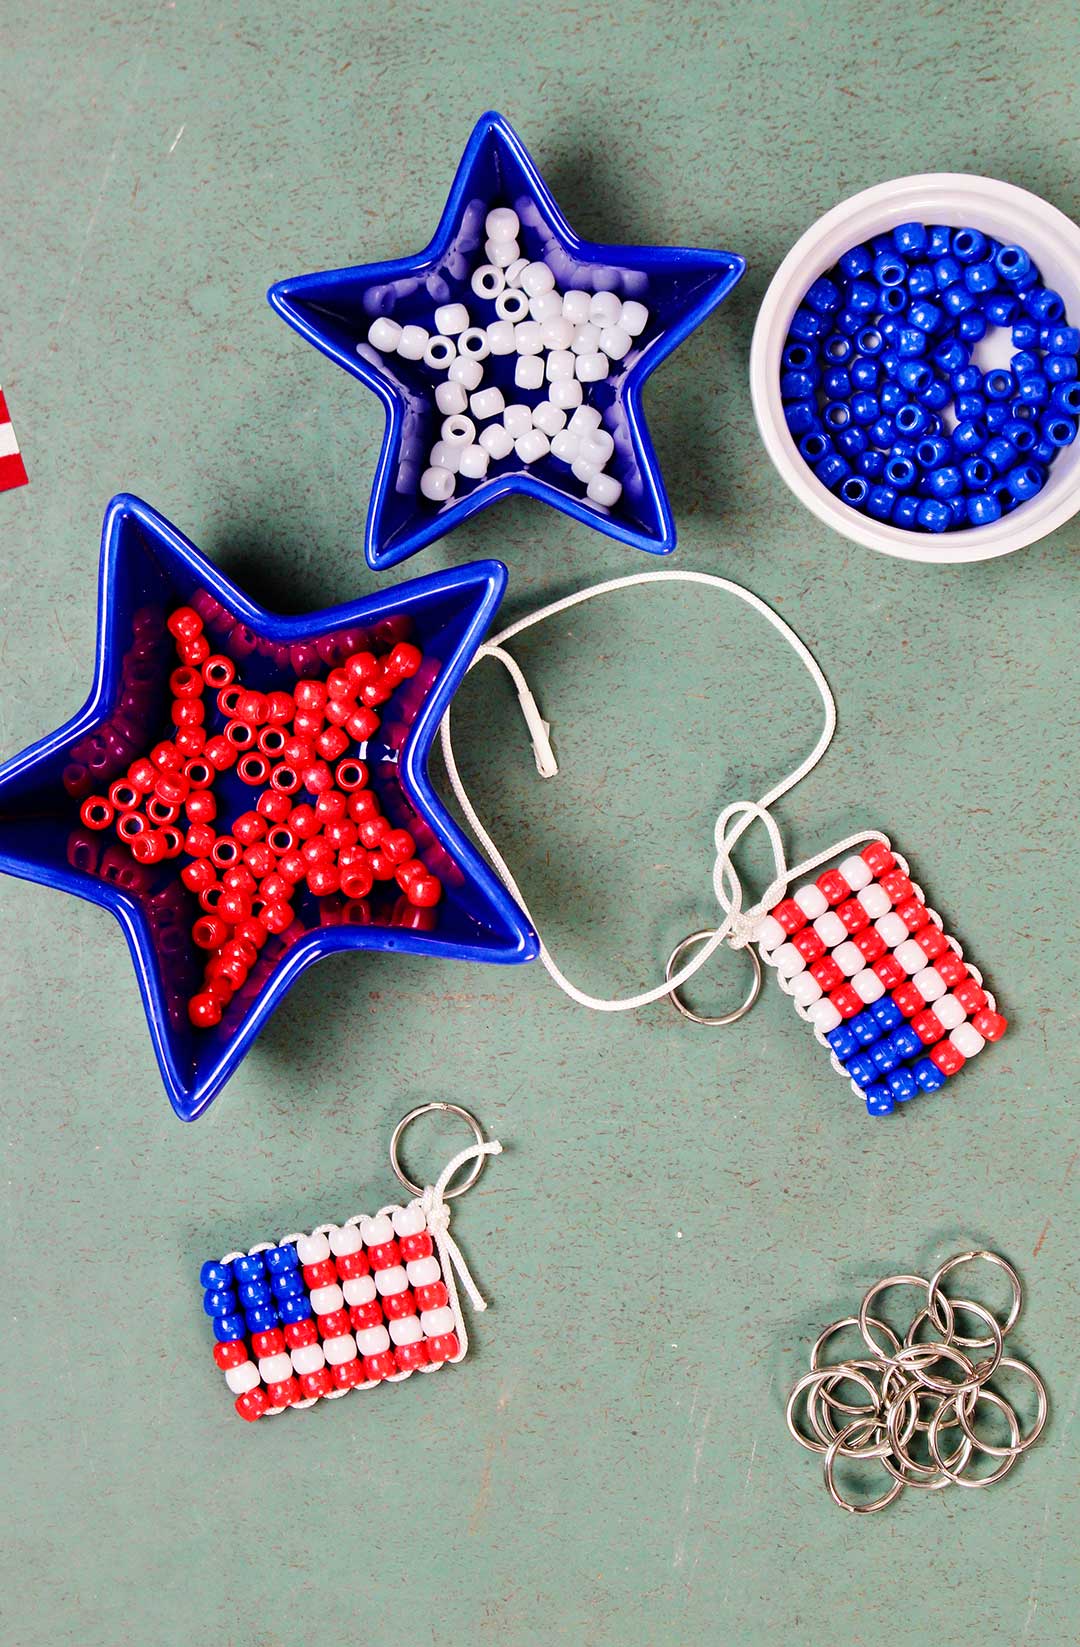 Three dishes of red, white and blue pony beads with a finished beaded flag keychain and key rings resting on a green counter. White string with beads showing step four, finishing off the keychain.